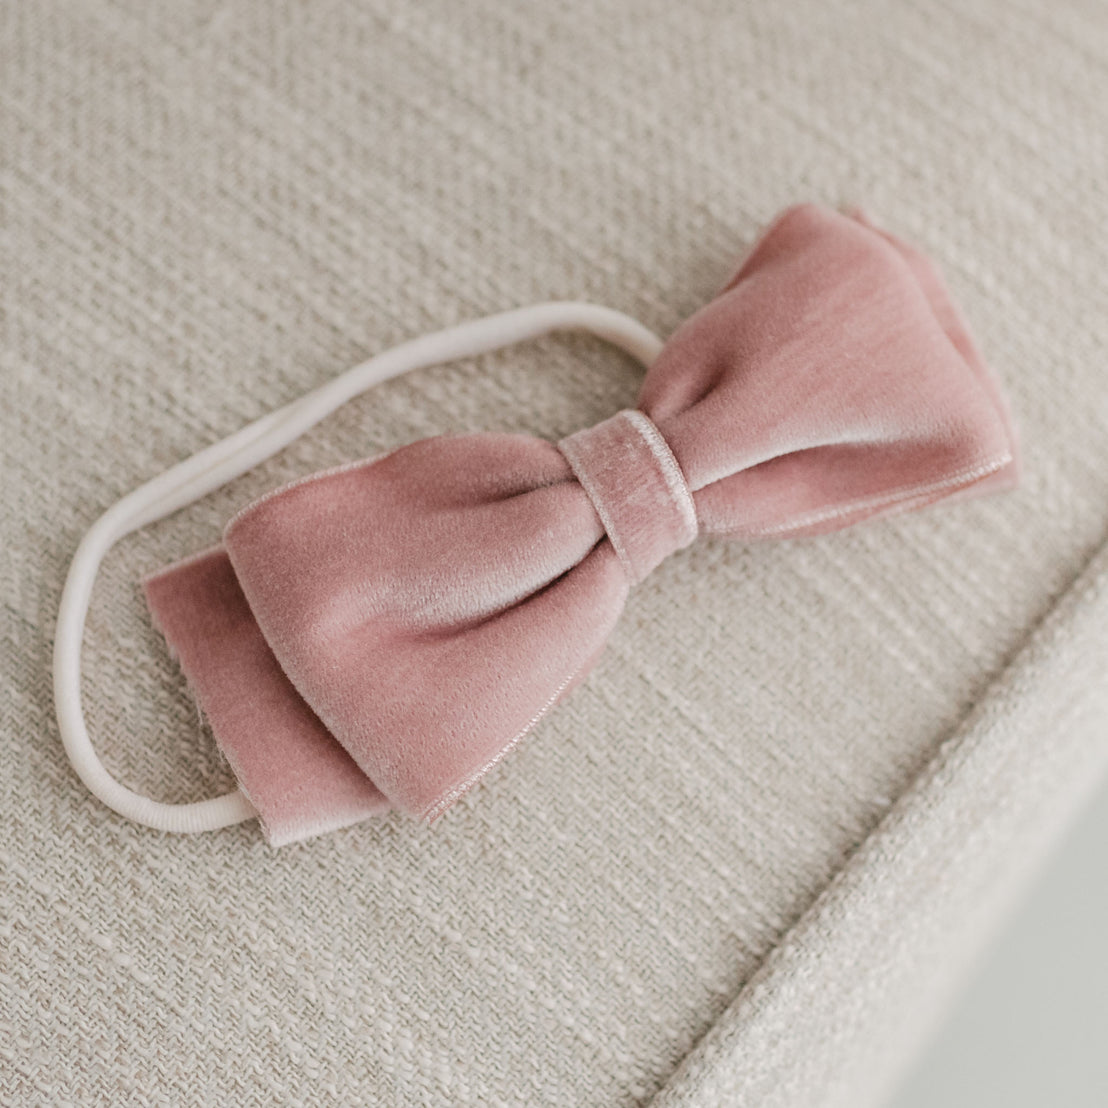 A soft pink Elizabeth Velvet Bow Headband with an elastic band lies on a textured beige fabric surface, suggesting a delicate and vintage piece.